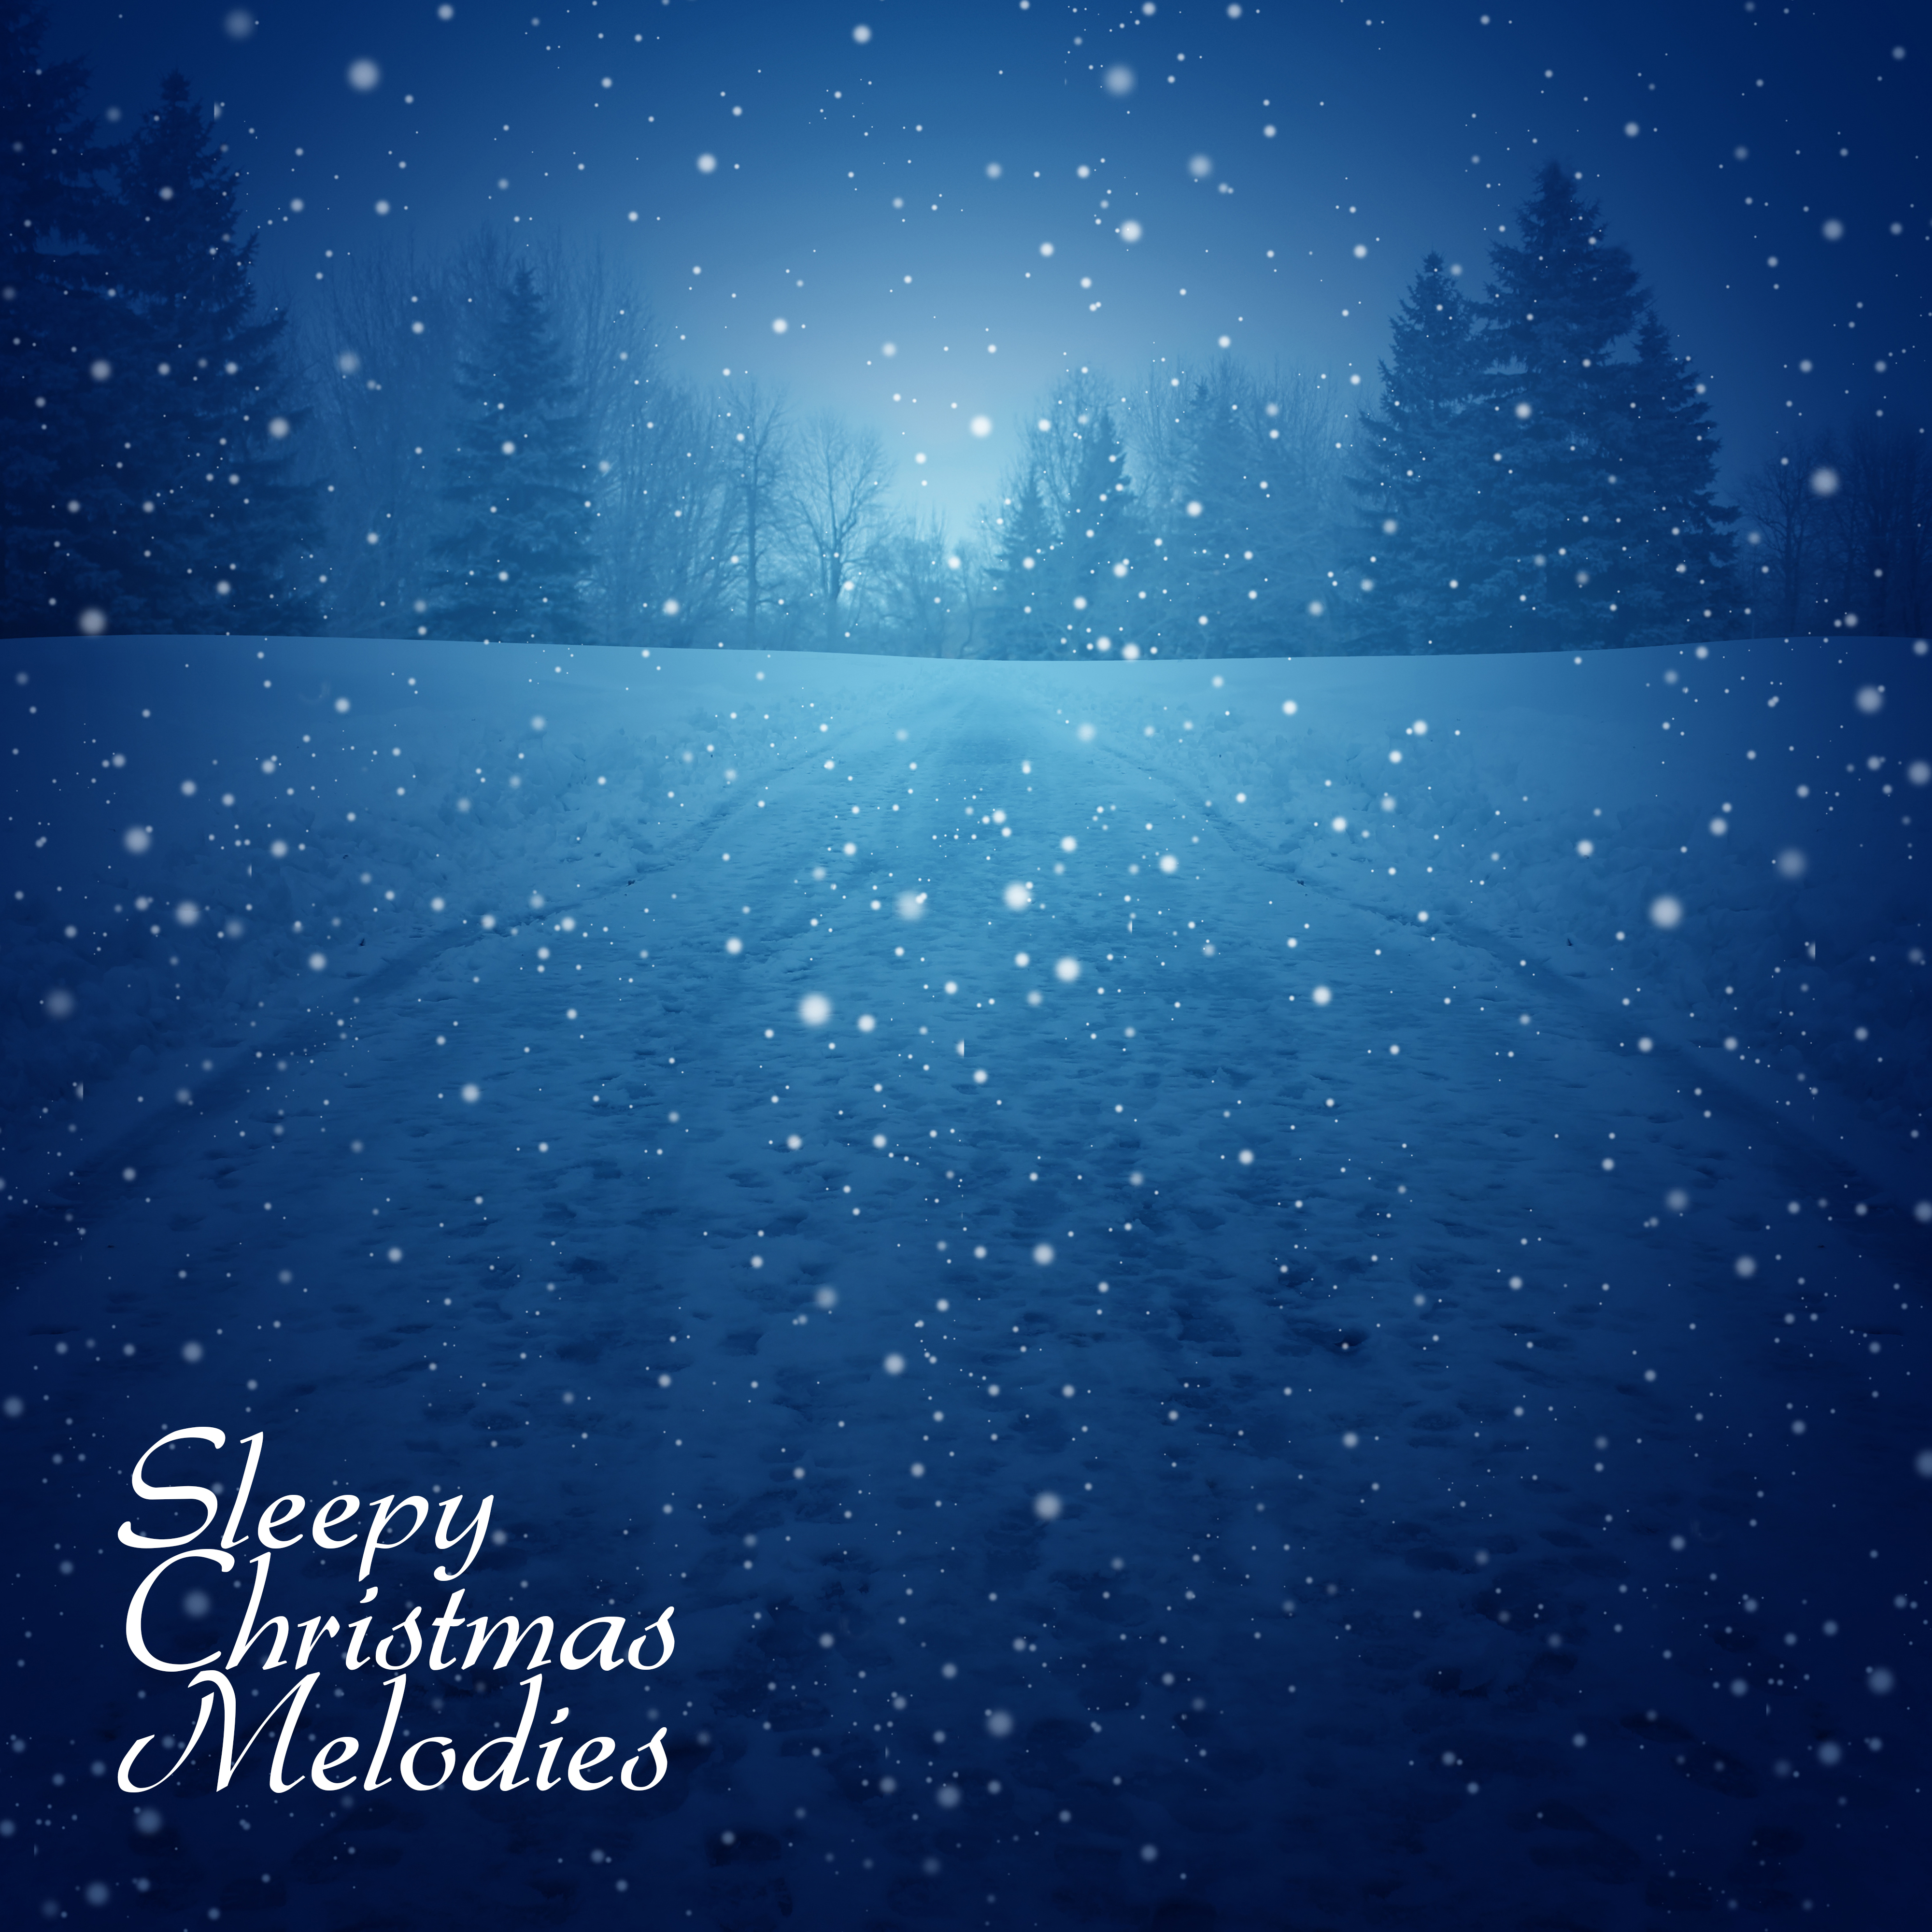 Sleepy Christmas Melodies: Music for Sleep, Short Naps or Rest